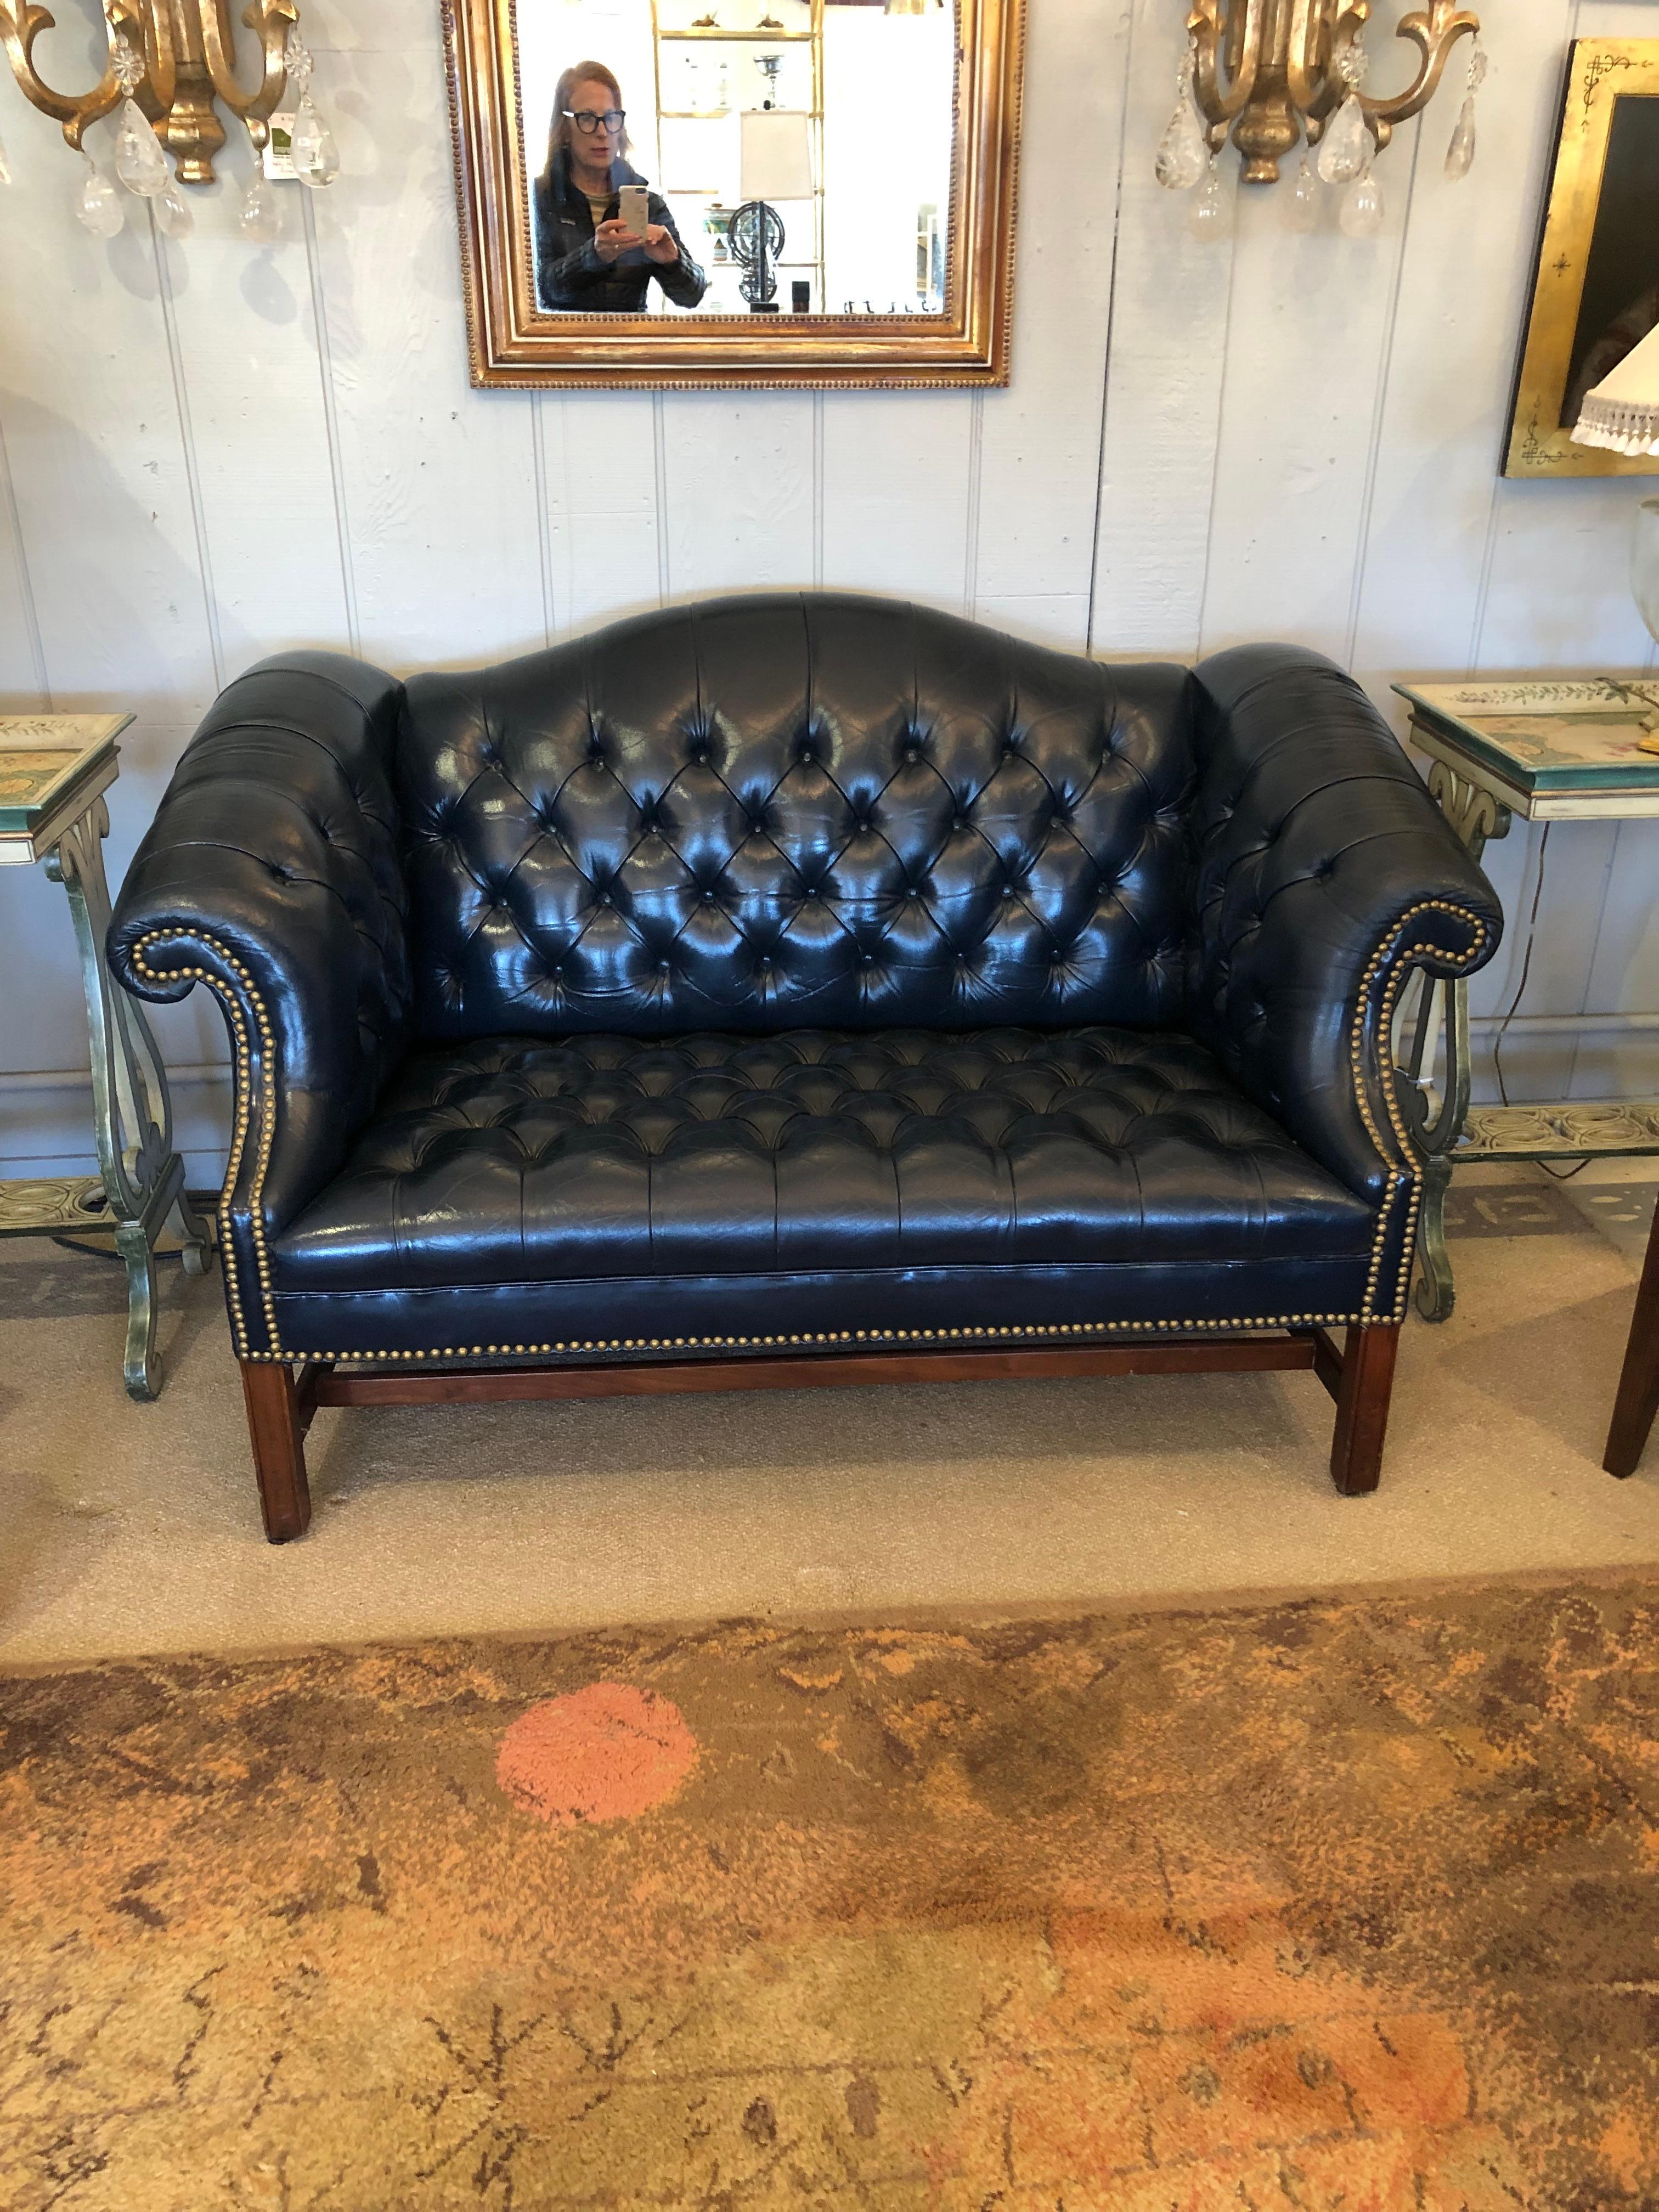 Classic Chesterfield style tufted navy blue leather or leatherette loveseat having scrolled arms, straight mahogany legs and brass nailhead detailing.  Great size and comfortable.